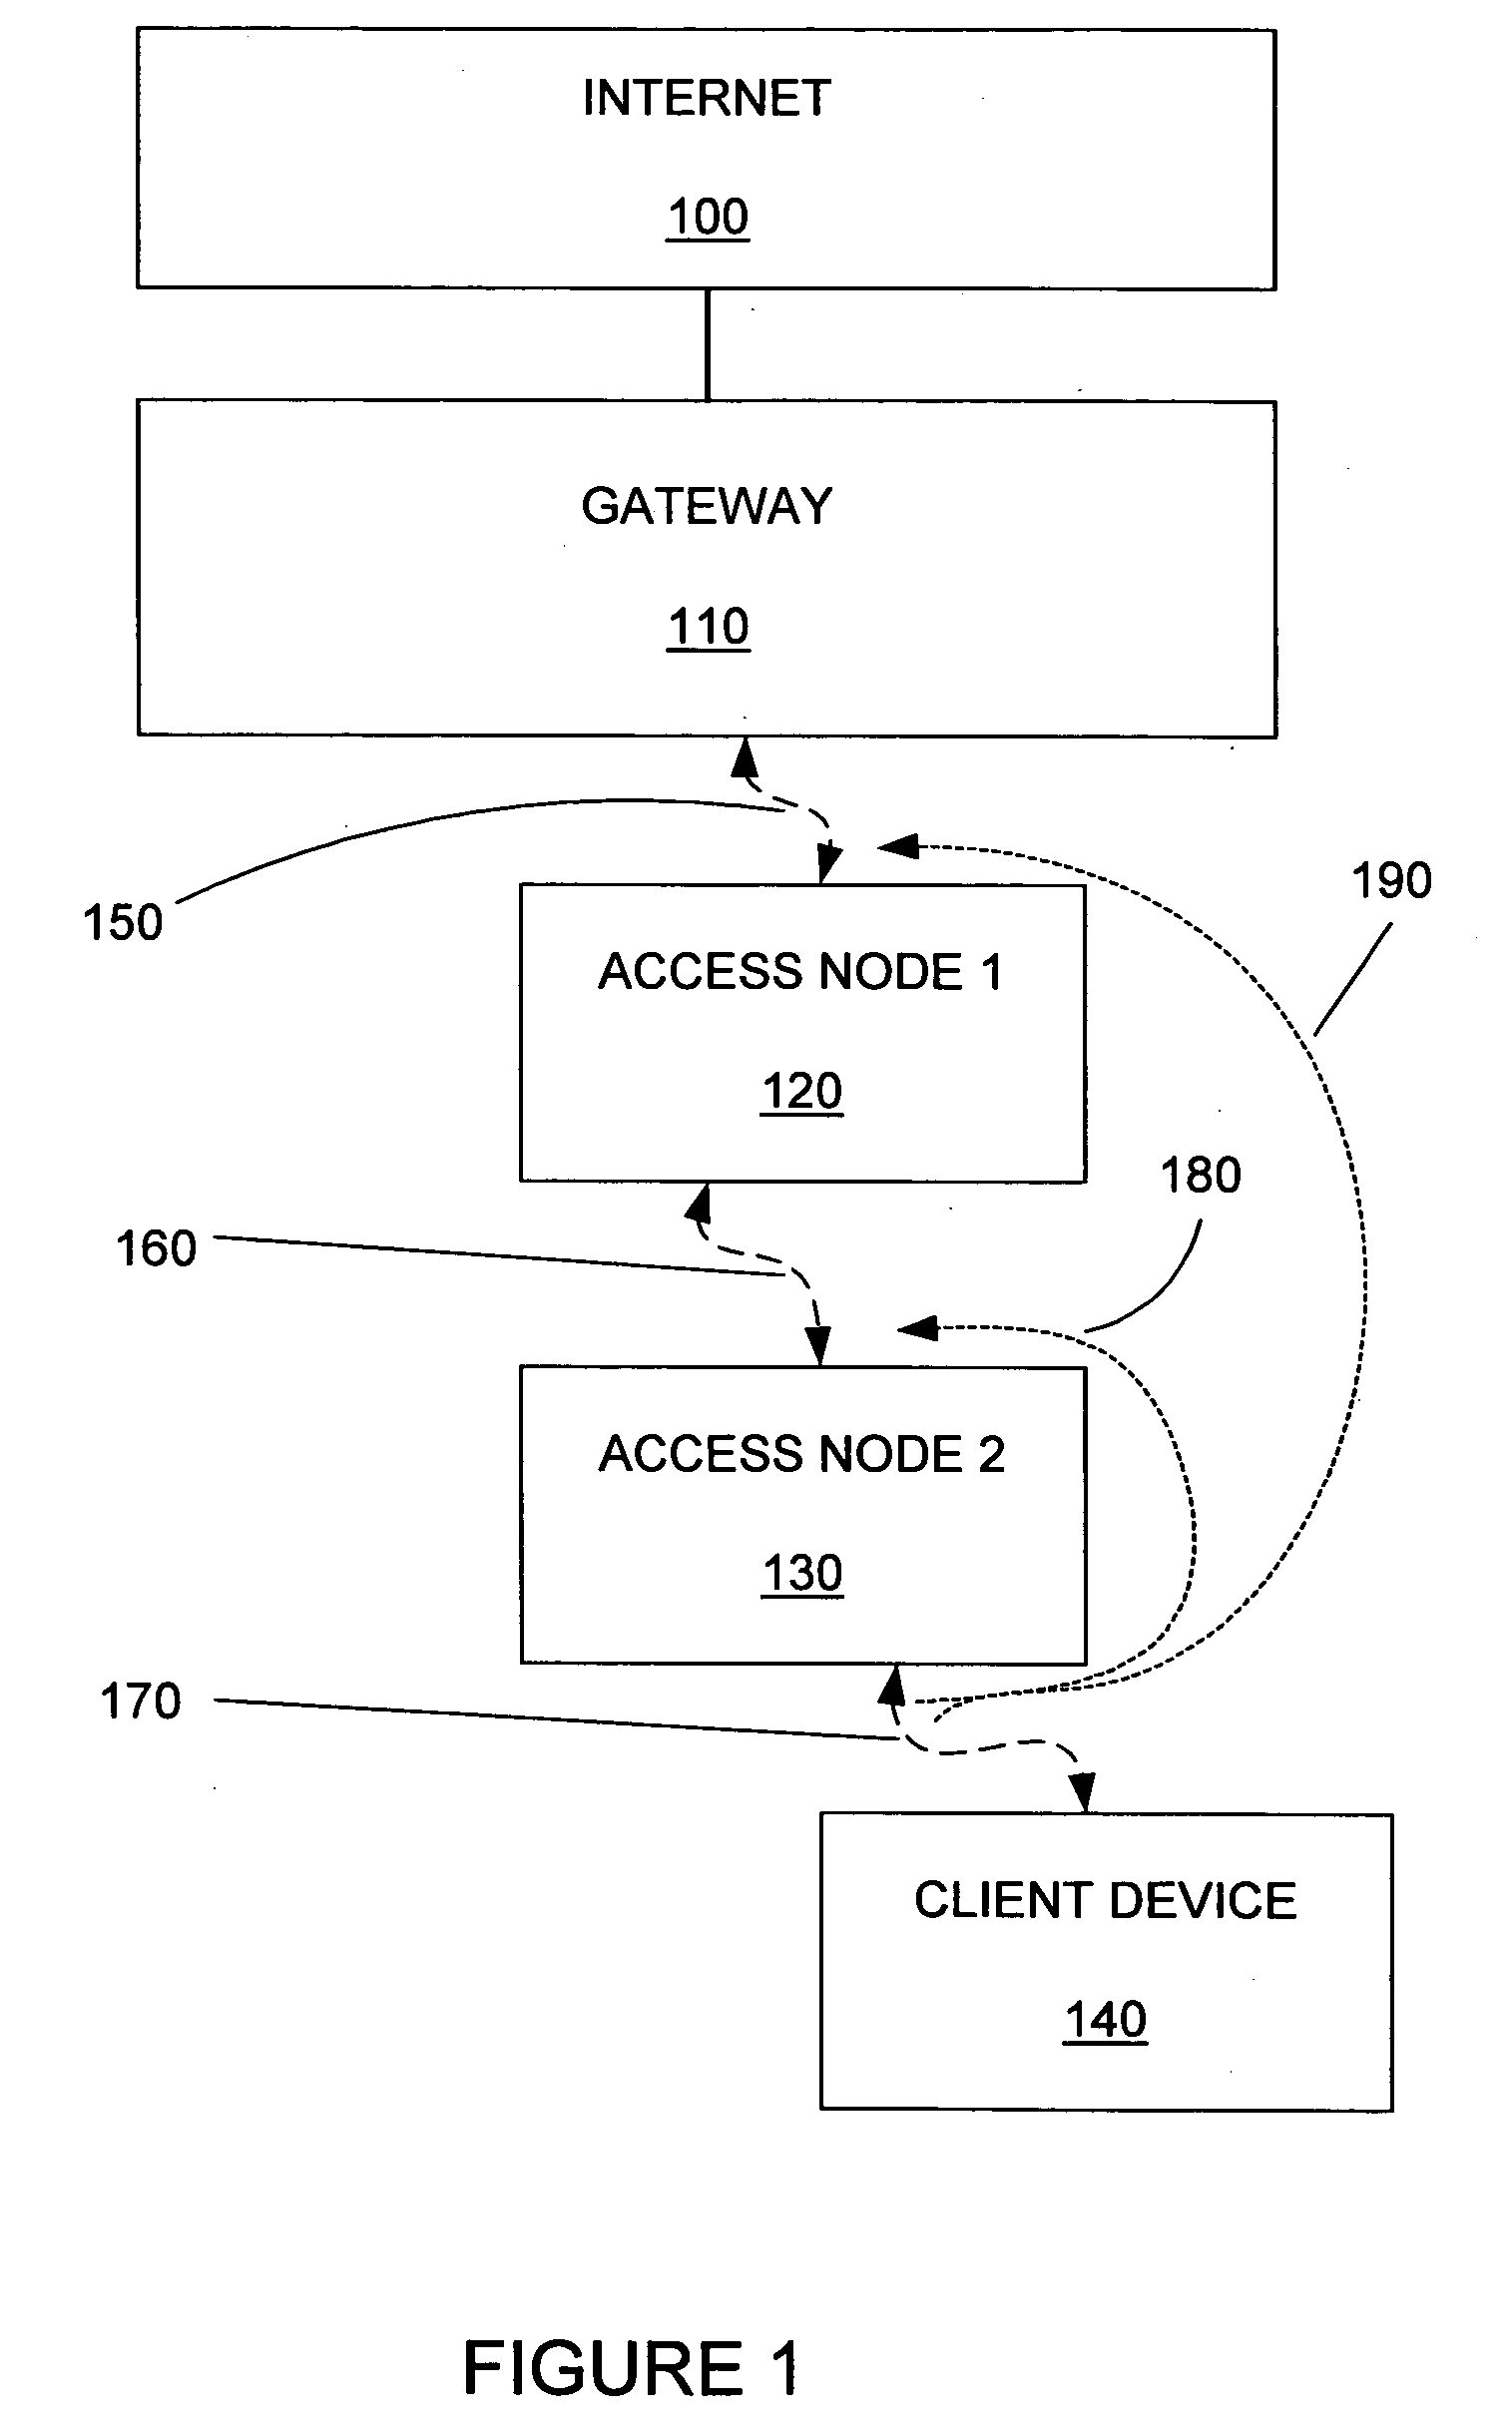 Minimization of channel filters within wireless access nodes